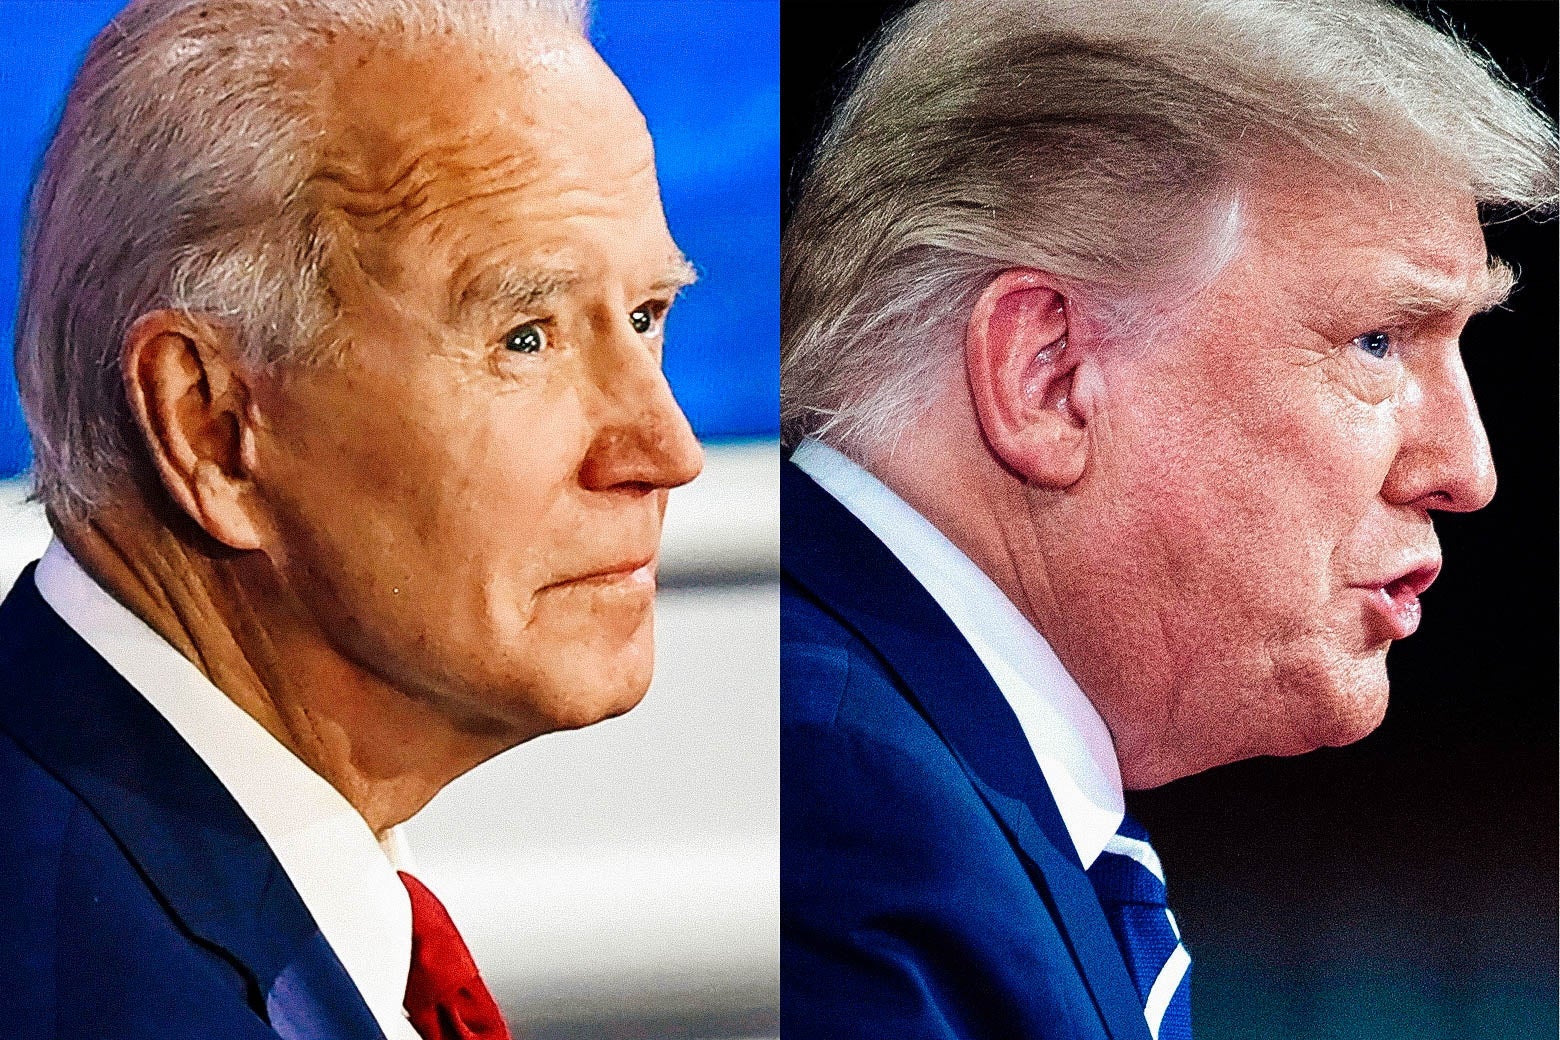 Side profiles of Biden, left, and Trump, right